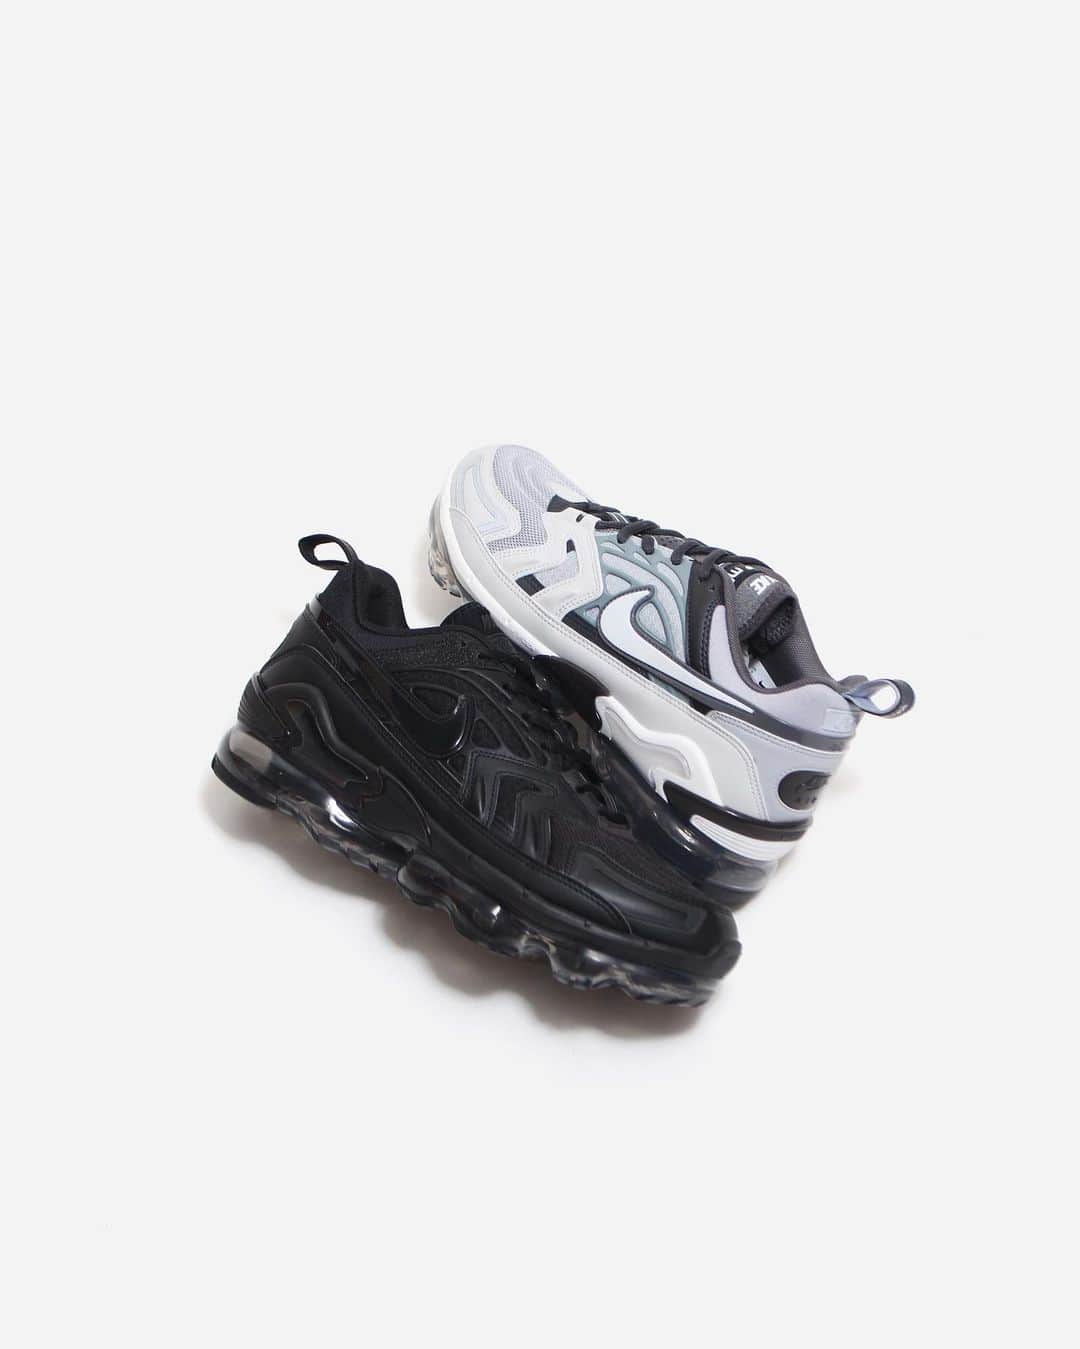 A+Sのインスタグラム：「2021. 3. 4 (thu) in store  ■NIKE AIR VAPORMAX EVO  COLOR : BLACK, WOLF GREY SIZE : 26.0cm - 29.0cm PRICE : ¥25,300 (tax incl.)  トップクラスのAir Maxをアピール。 ナイキ エア ヴェイパーマックス エヴォは、エア マックスのDNAが細部にまで息づくデザインで、特徴的な7つのNikeアイコンをアピールする一足です。 Airのパンテオンからのマストアイテムを一足に集約。歴史とイノベーション、Maxのすべてを継承しながら、新しい世界へ誘います。  Appeal the top class Air Max. The Nike Air VaporMax Evo is a pair of seven distinctive Nike icons, designed with Air Max's DNA in every detail. A collection of must-have items from Air's Pantheon. Inheriting history, innovation, and Max, we invite you to a new world.  #a_and_s #NIKE #NIKEAIRMAX #NIKEAIRVAPORMAX #NIKEAIRVAPORMAXEVO」